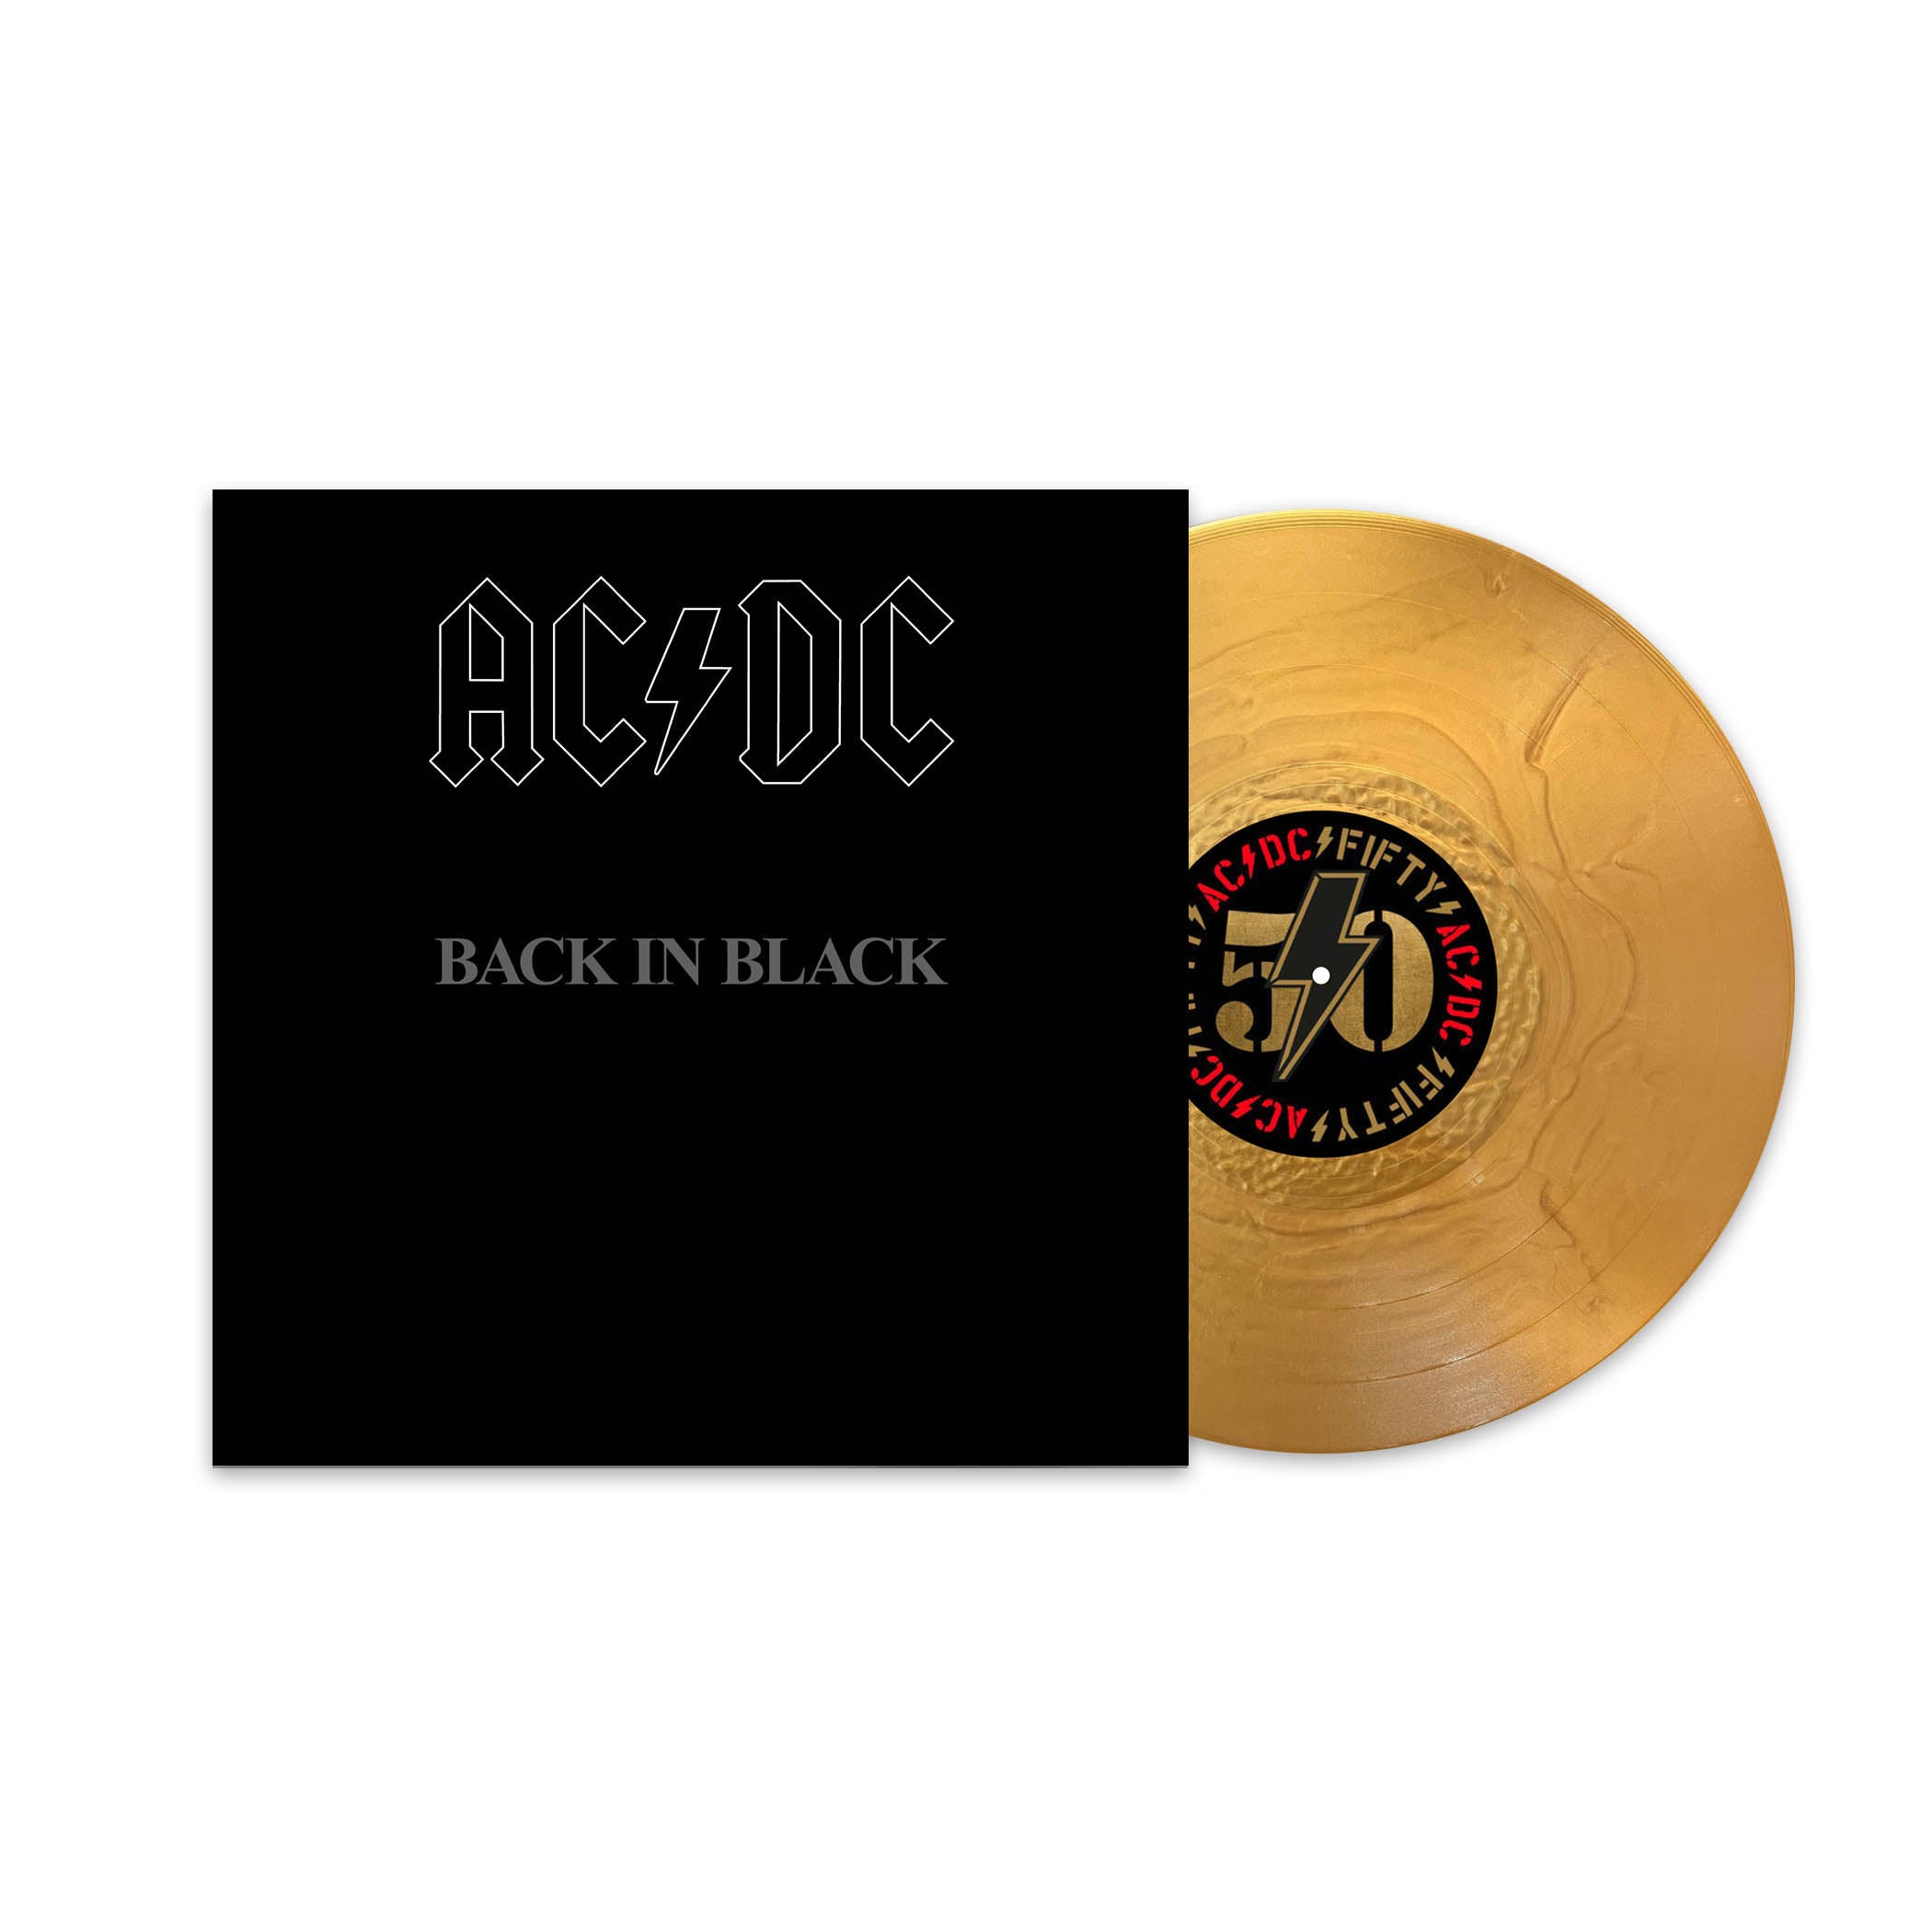  Back to Black + Frank: Deluxe Edition's: CDs y Vinilo